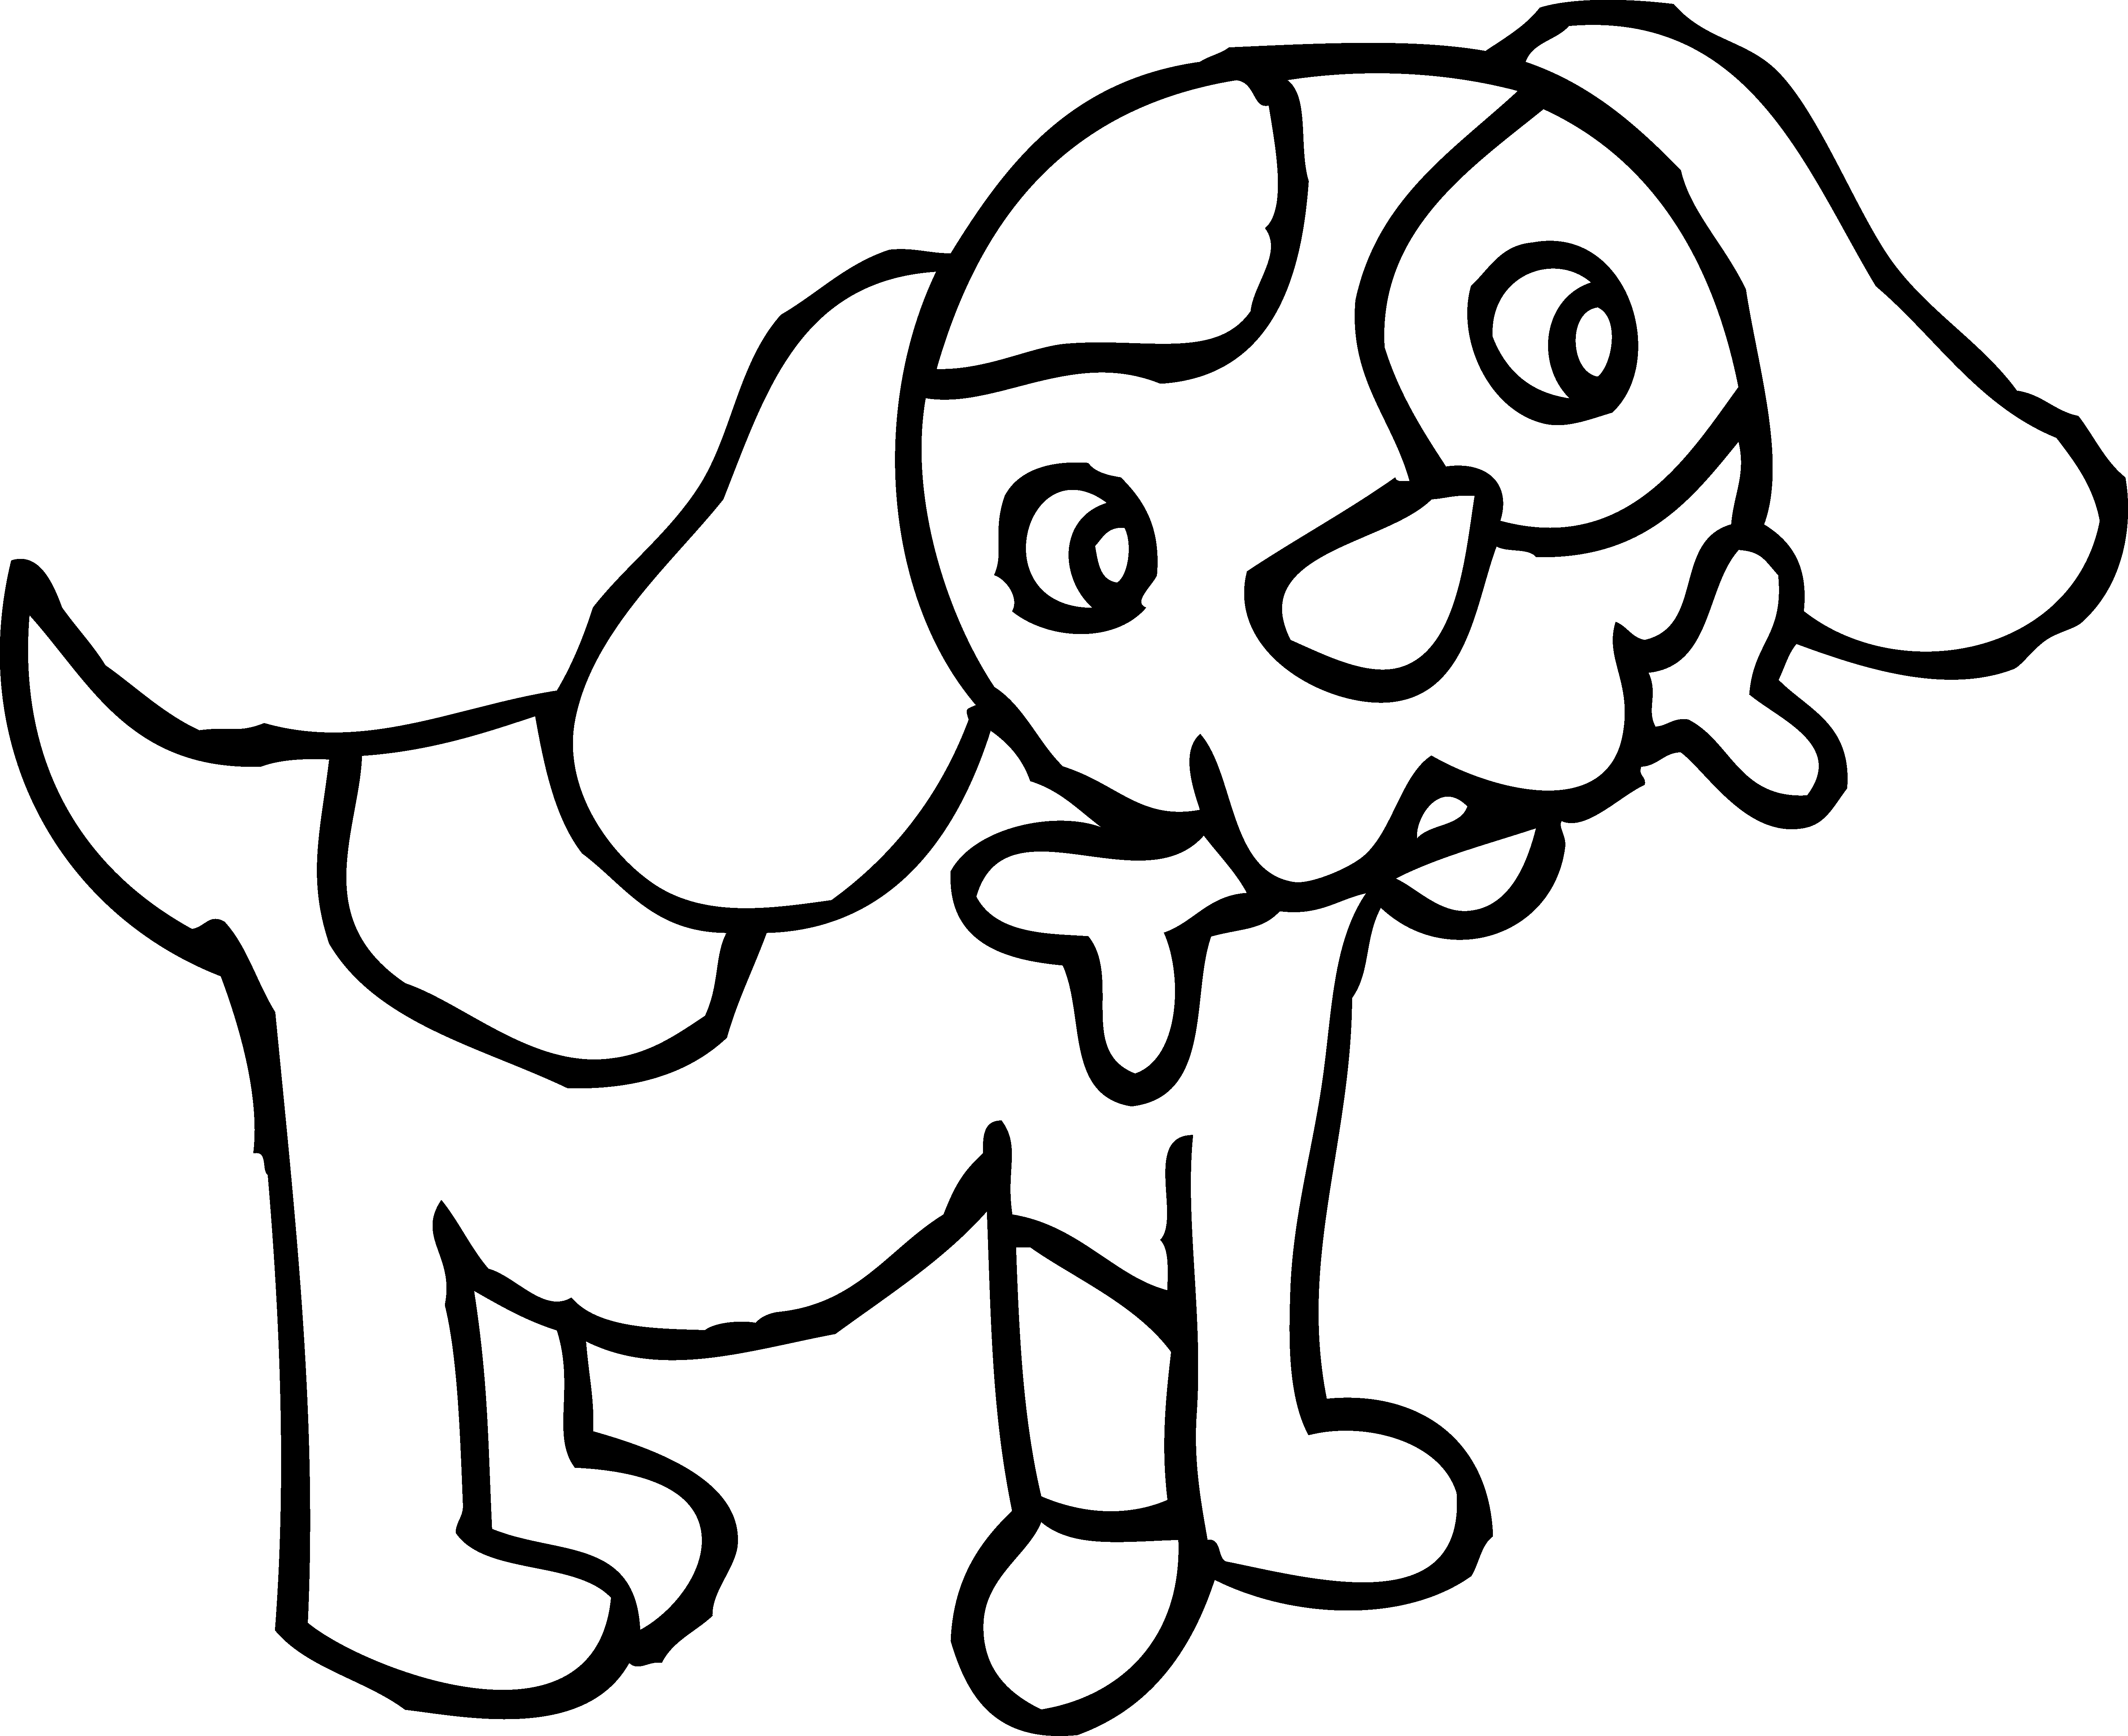 Dogs clipart colour. Coloring page of dog